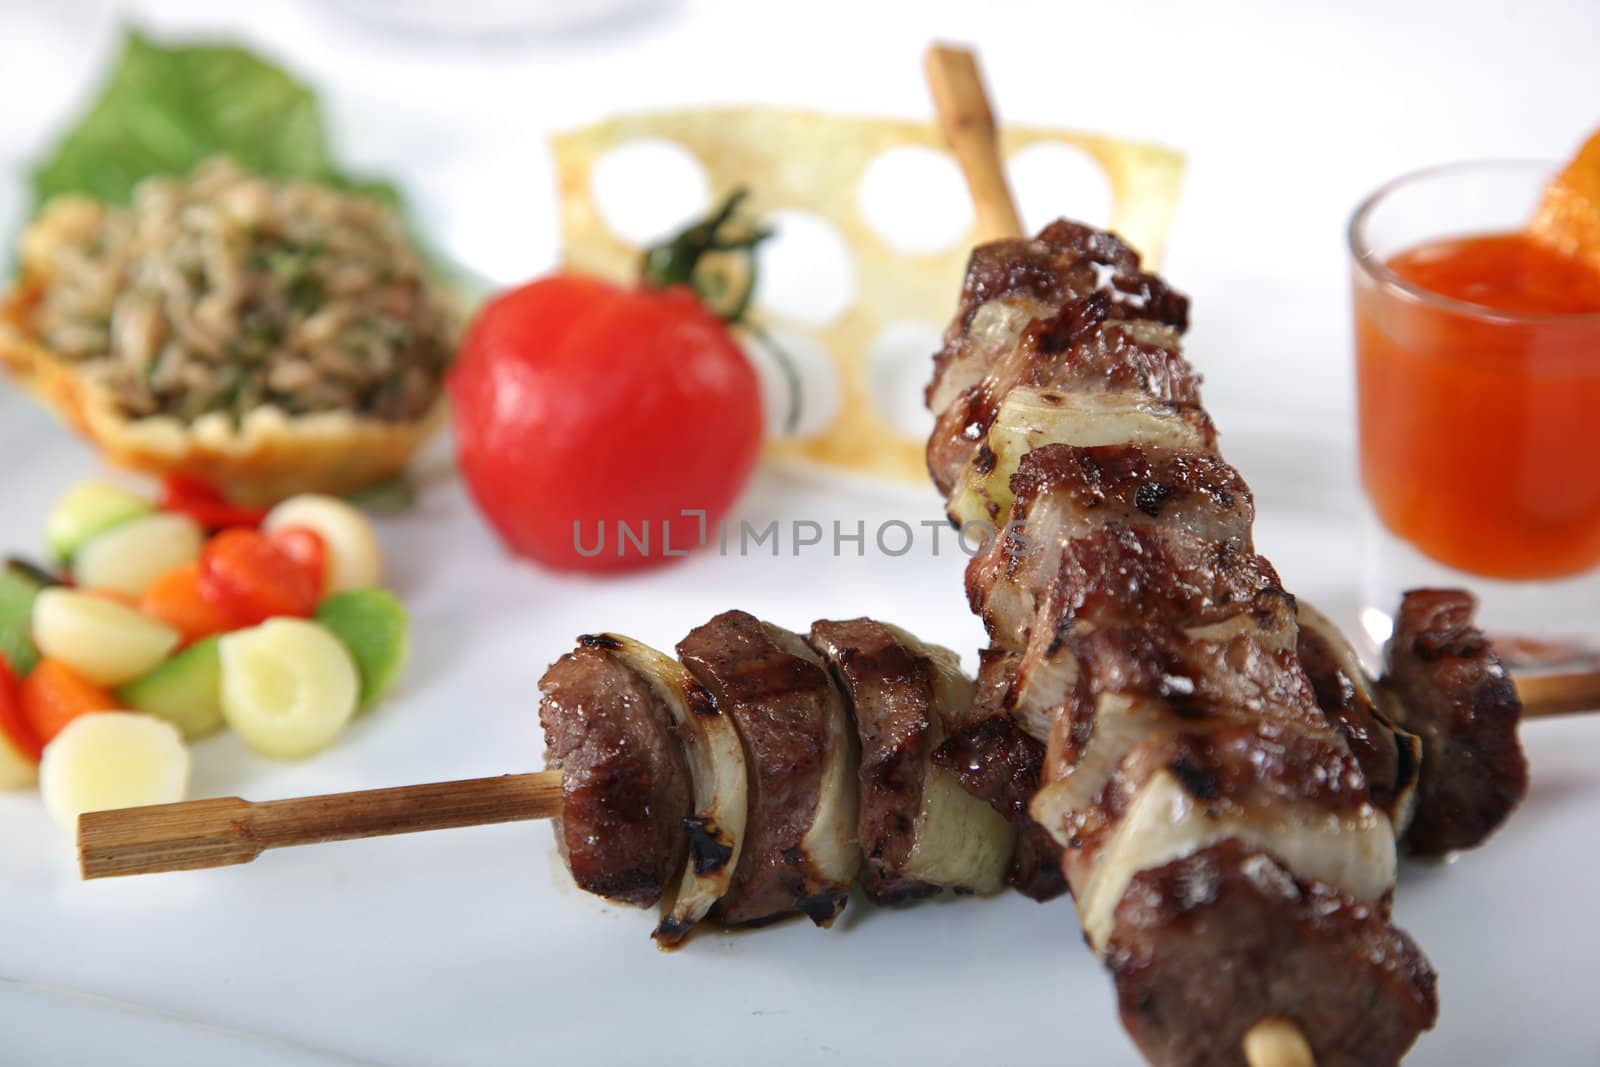 Meat skewers on a dish with tomato and vegetables